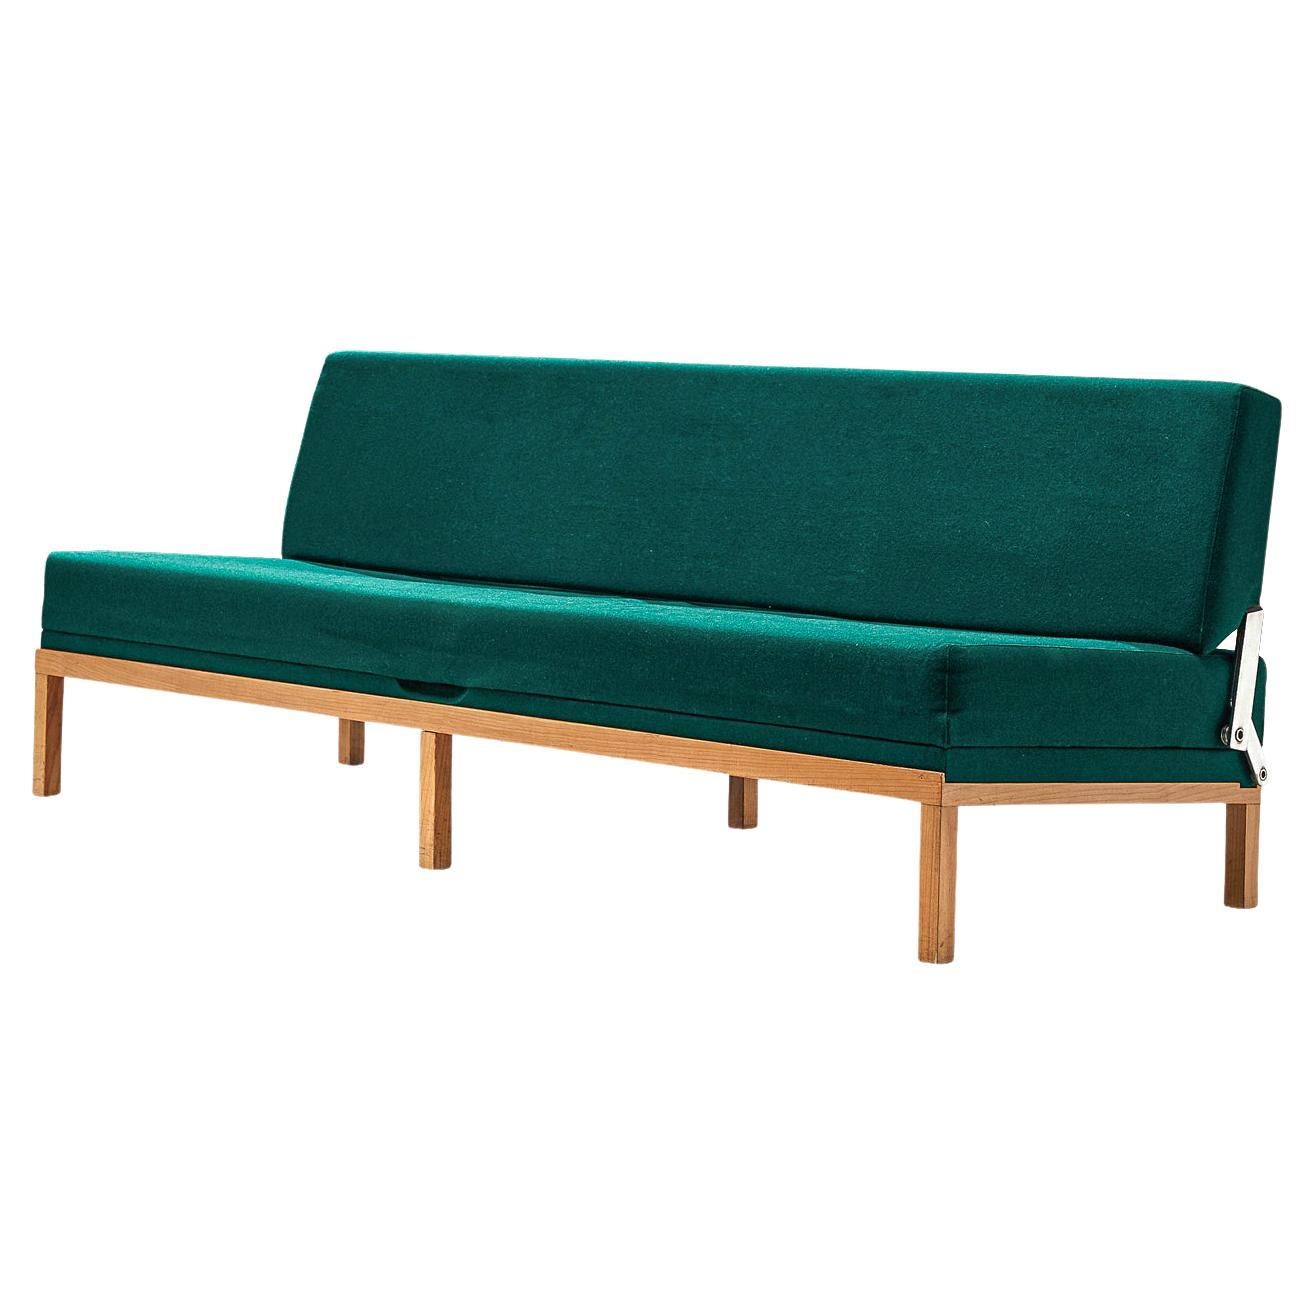 Johannes Spalt 'Constanze' Daybed in Green Upholstery